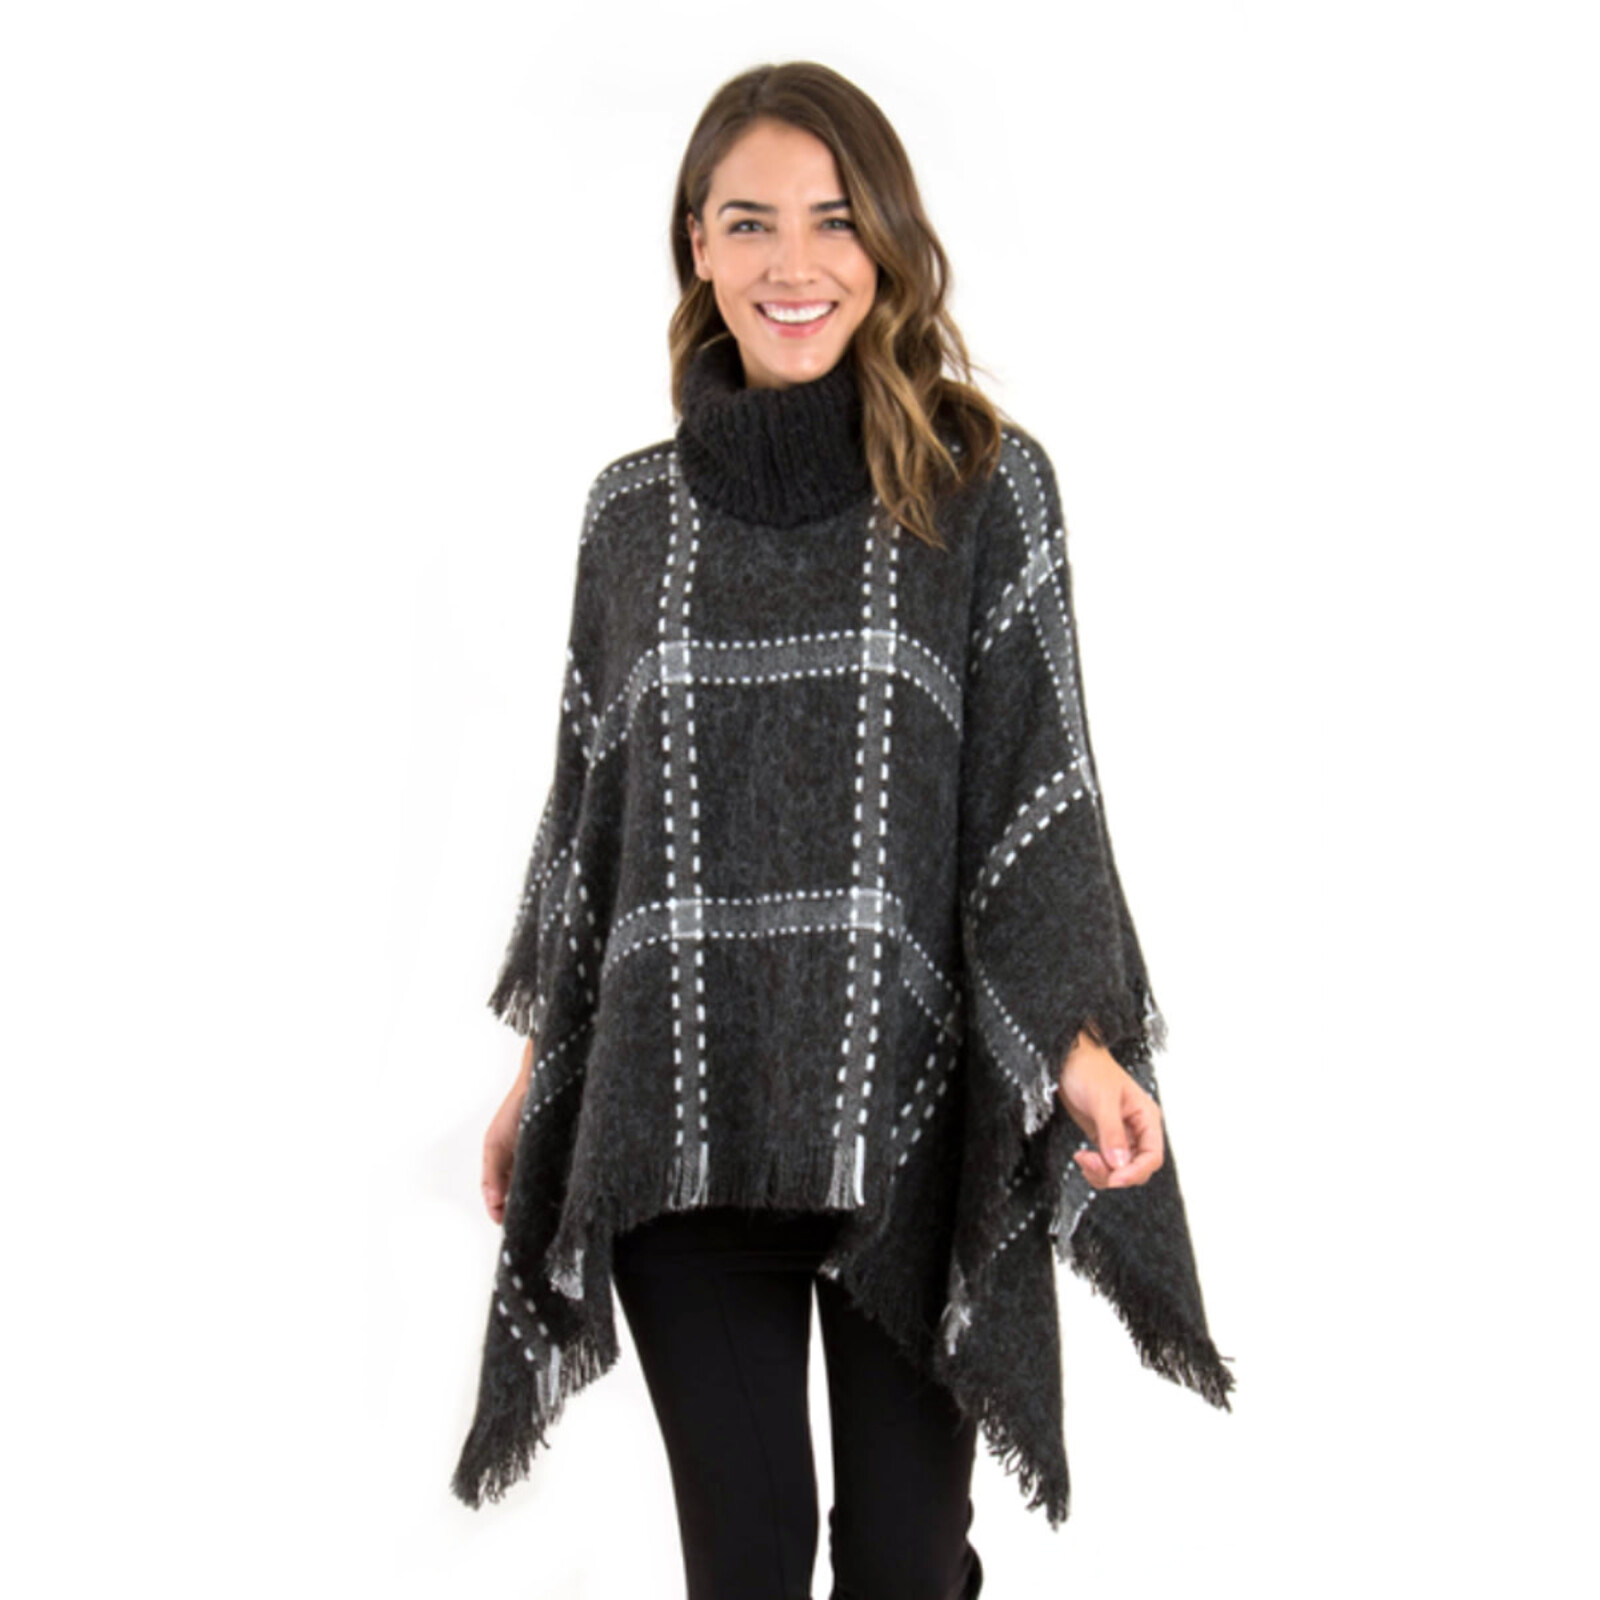 Simply Noelle Cowl Neck Stitched Plaid Poncho PNCH8006 loading=